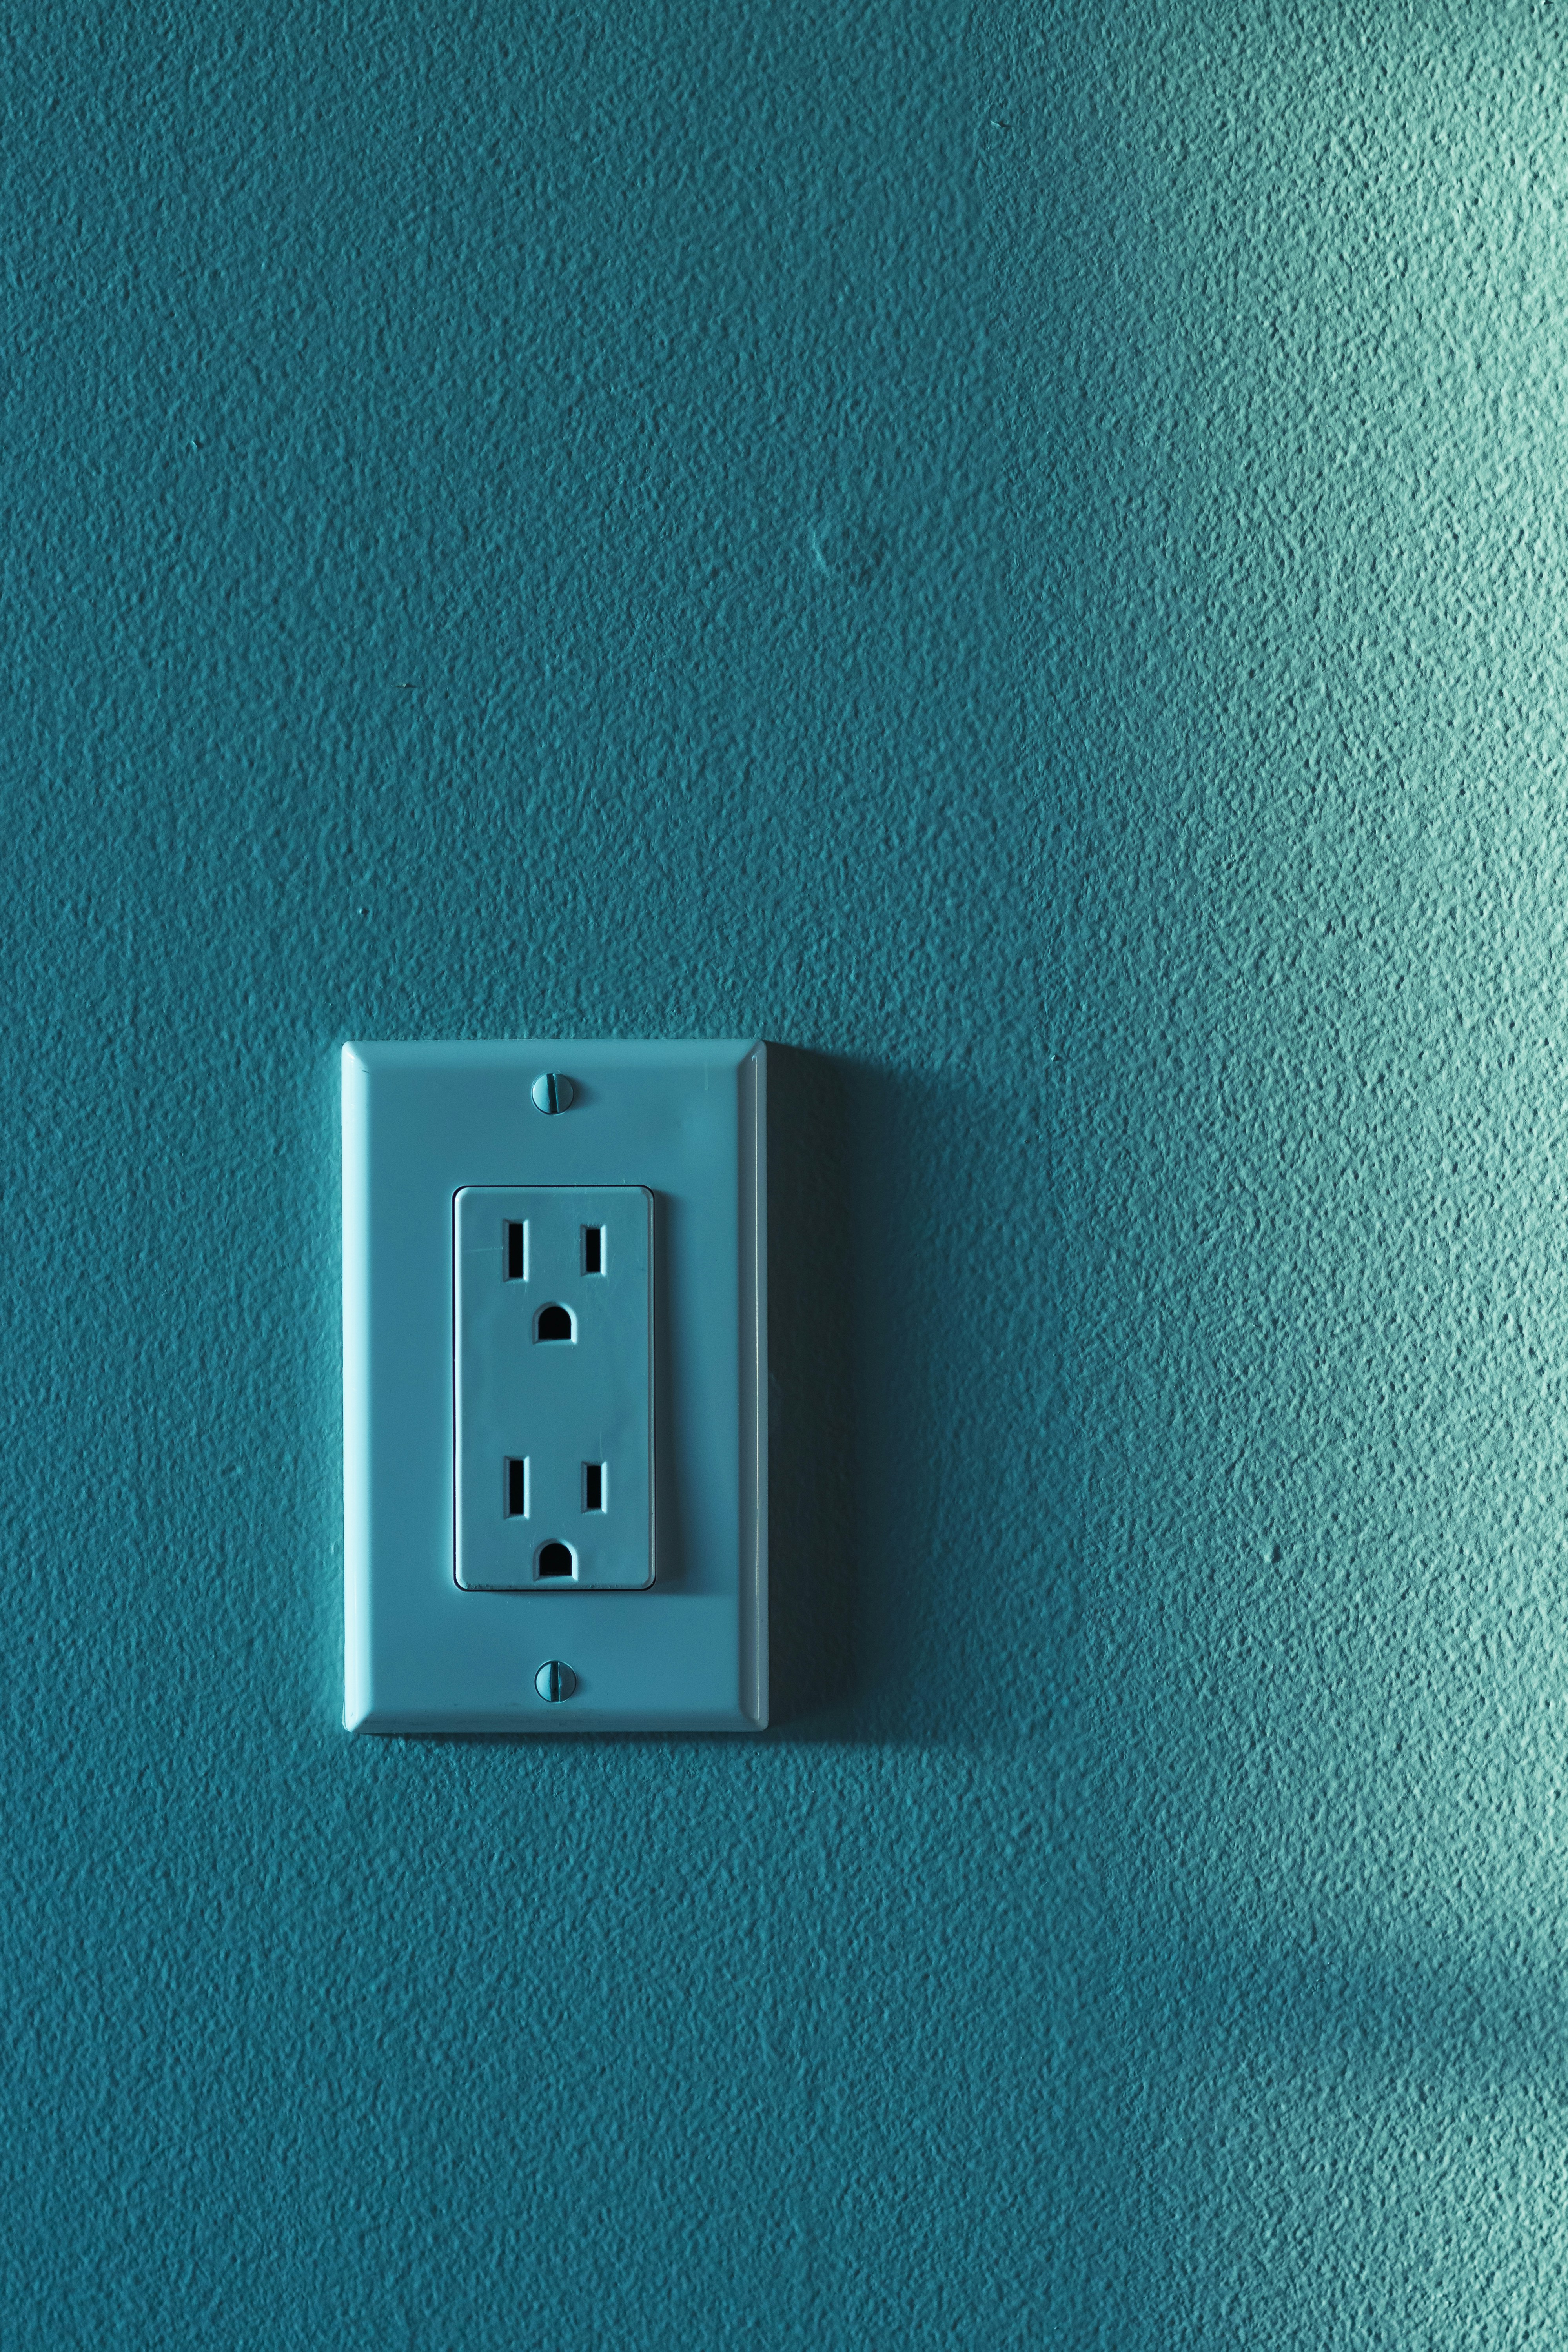 Everything You Need to Know About Outlets - Wildgrid Home